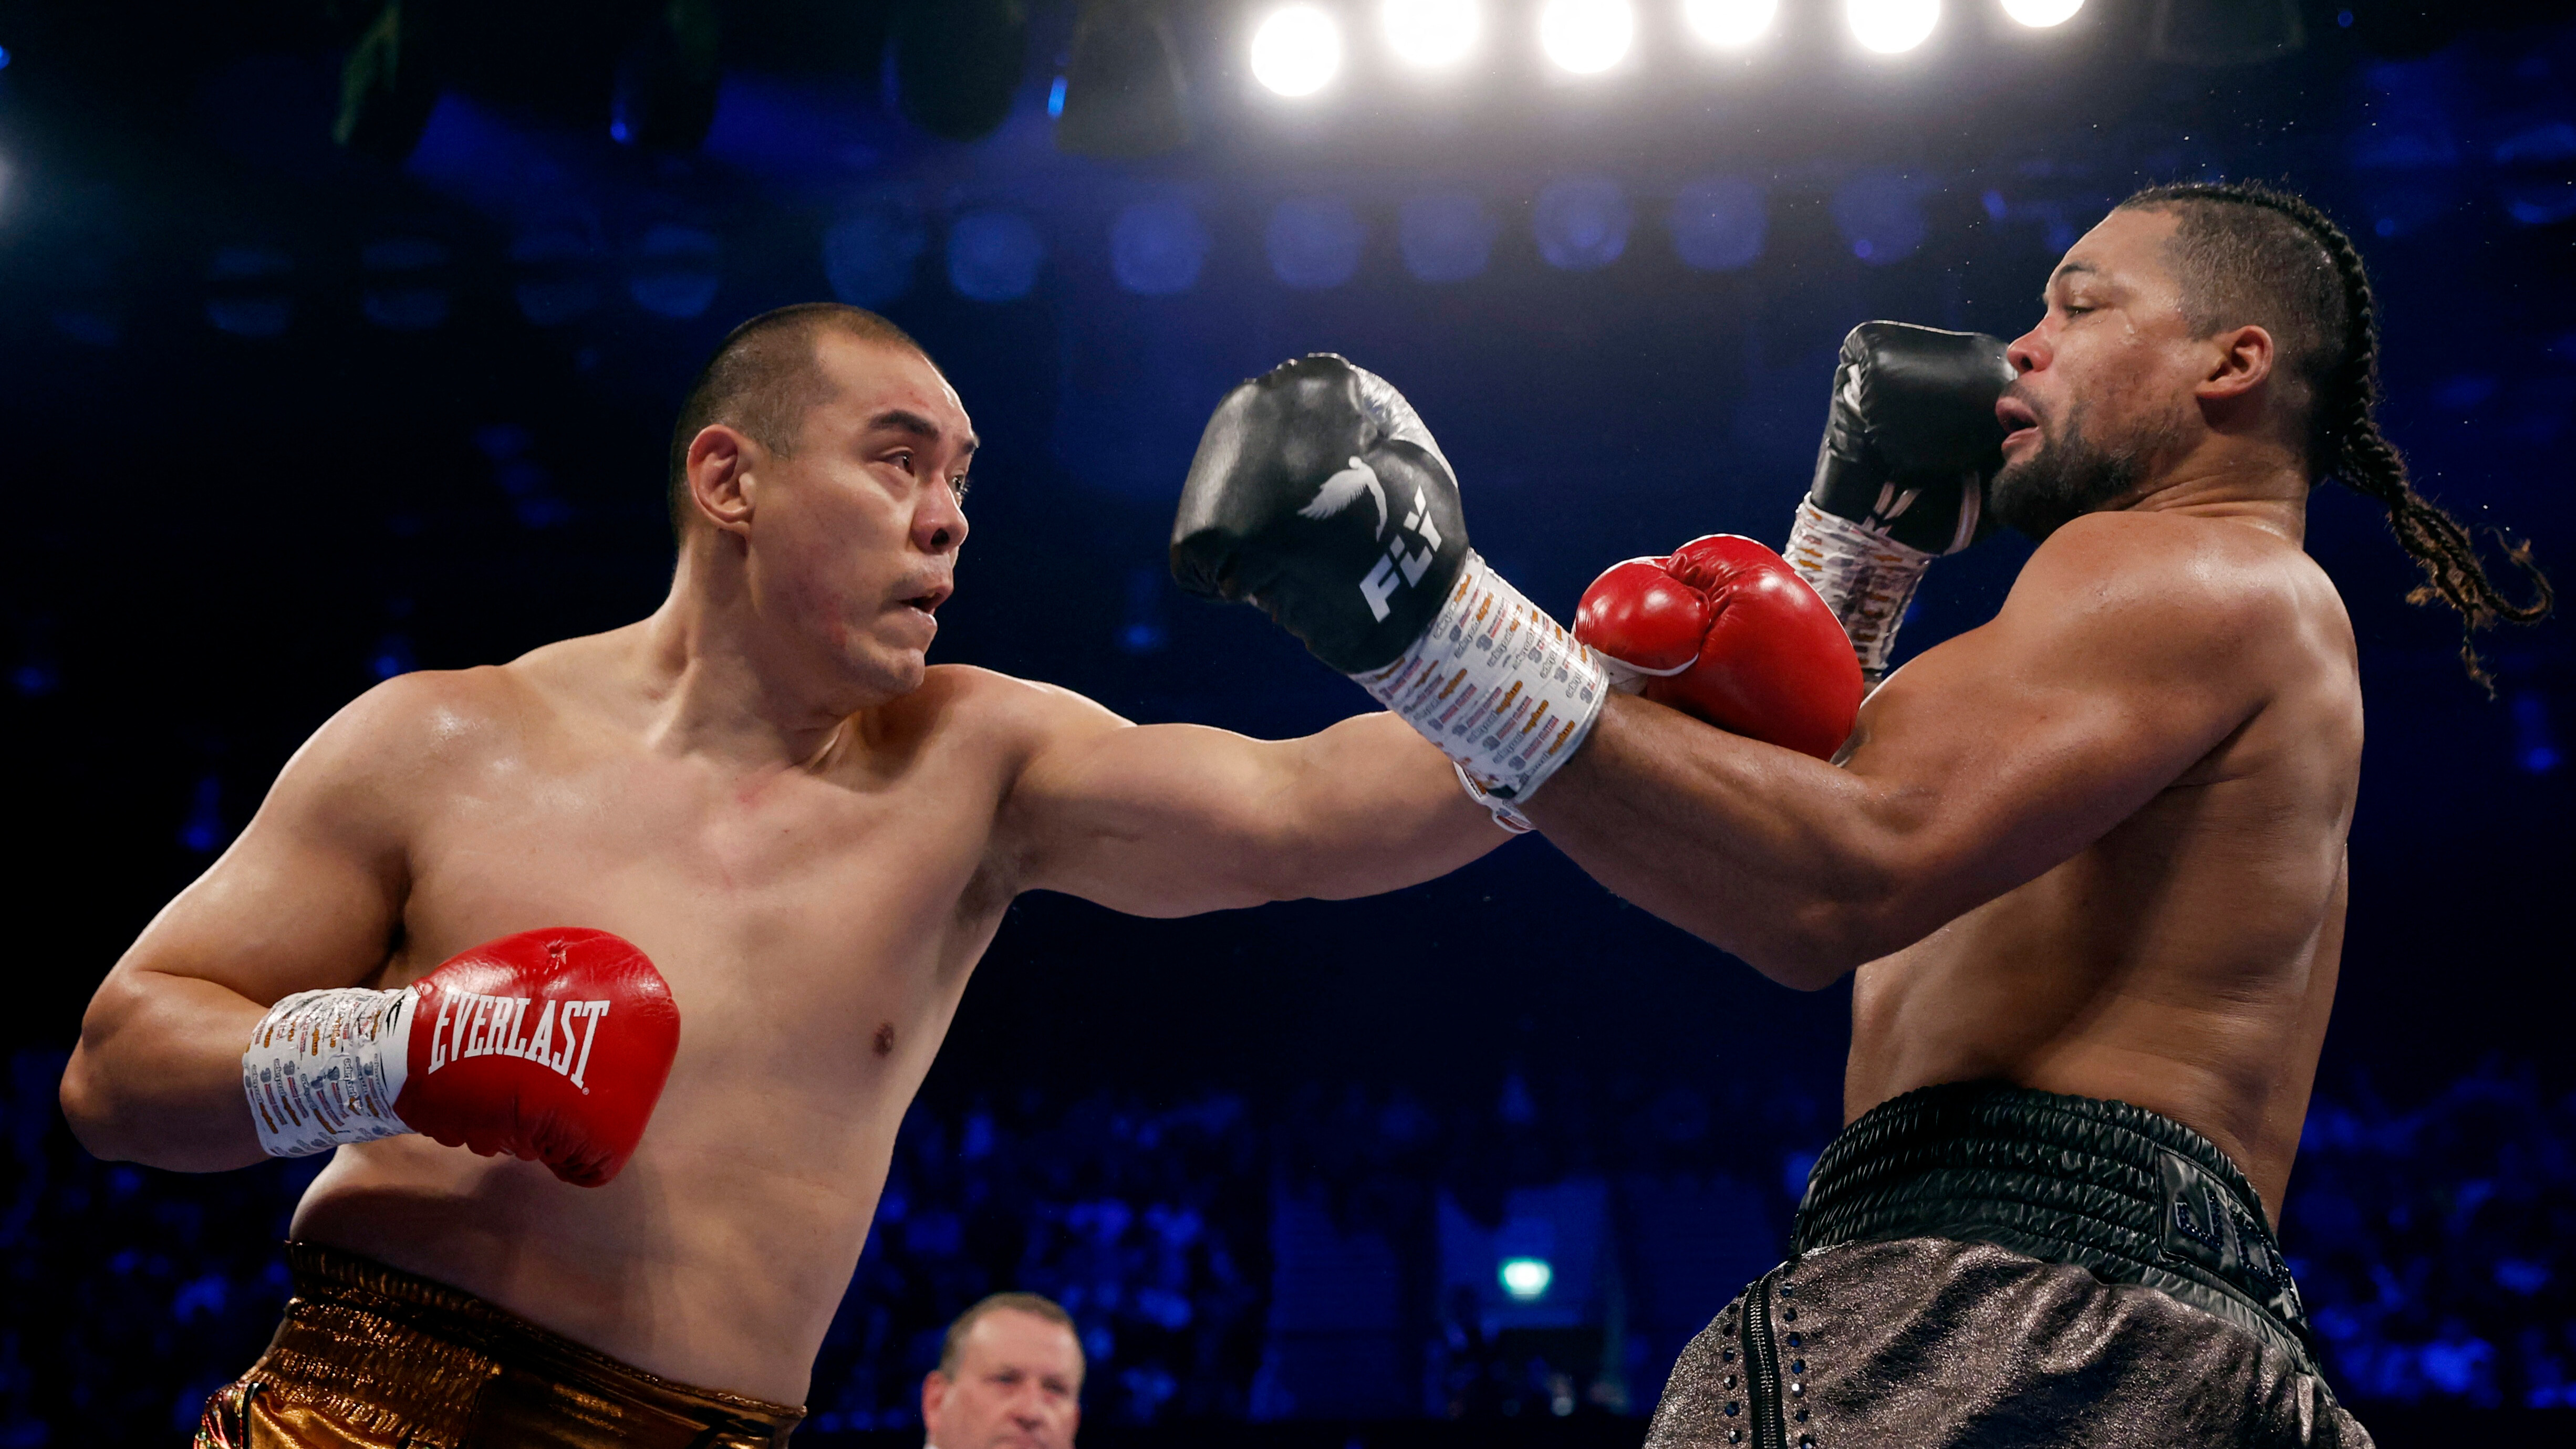 Zhlei put in a career best performance to stop Joyce and is now targeting a fight with Tyson Fury, Anthony Joshua or Oleksandr Usyk in Beijing./ Andrew Couldridge/Reuters